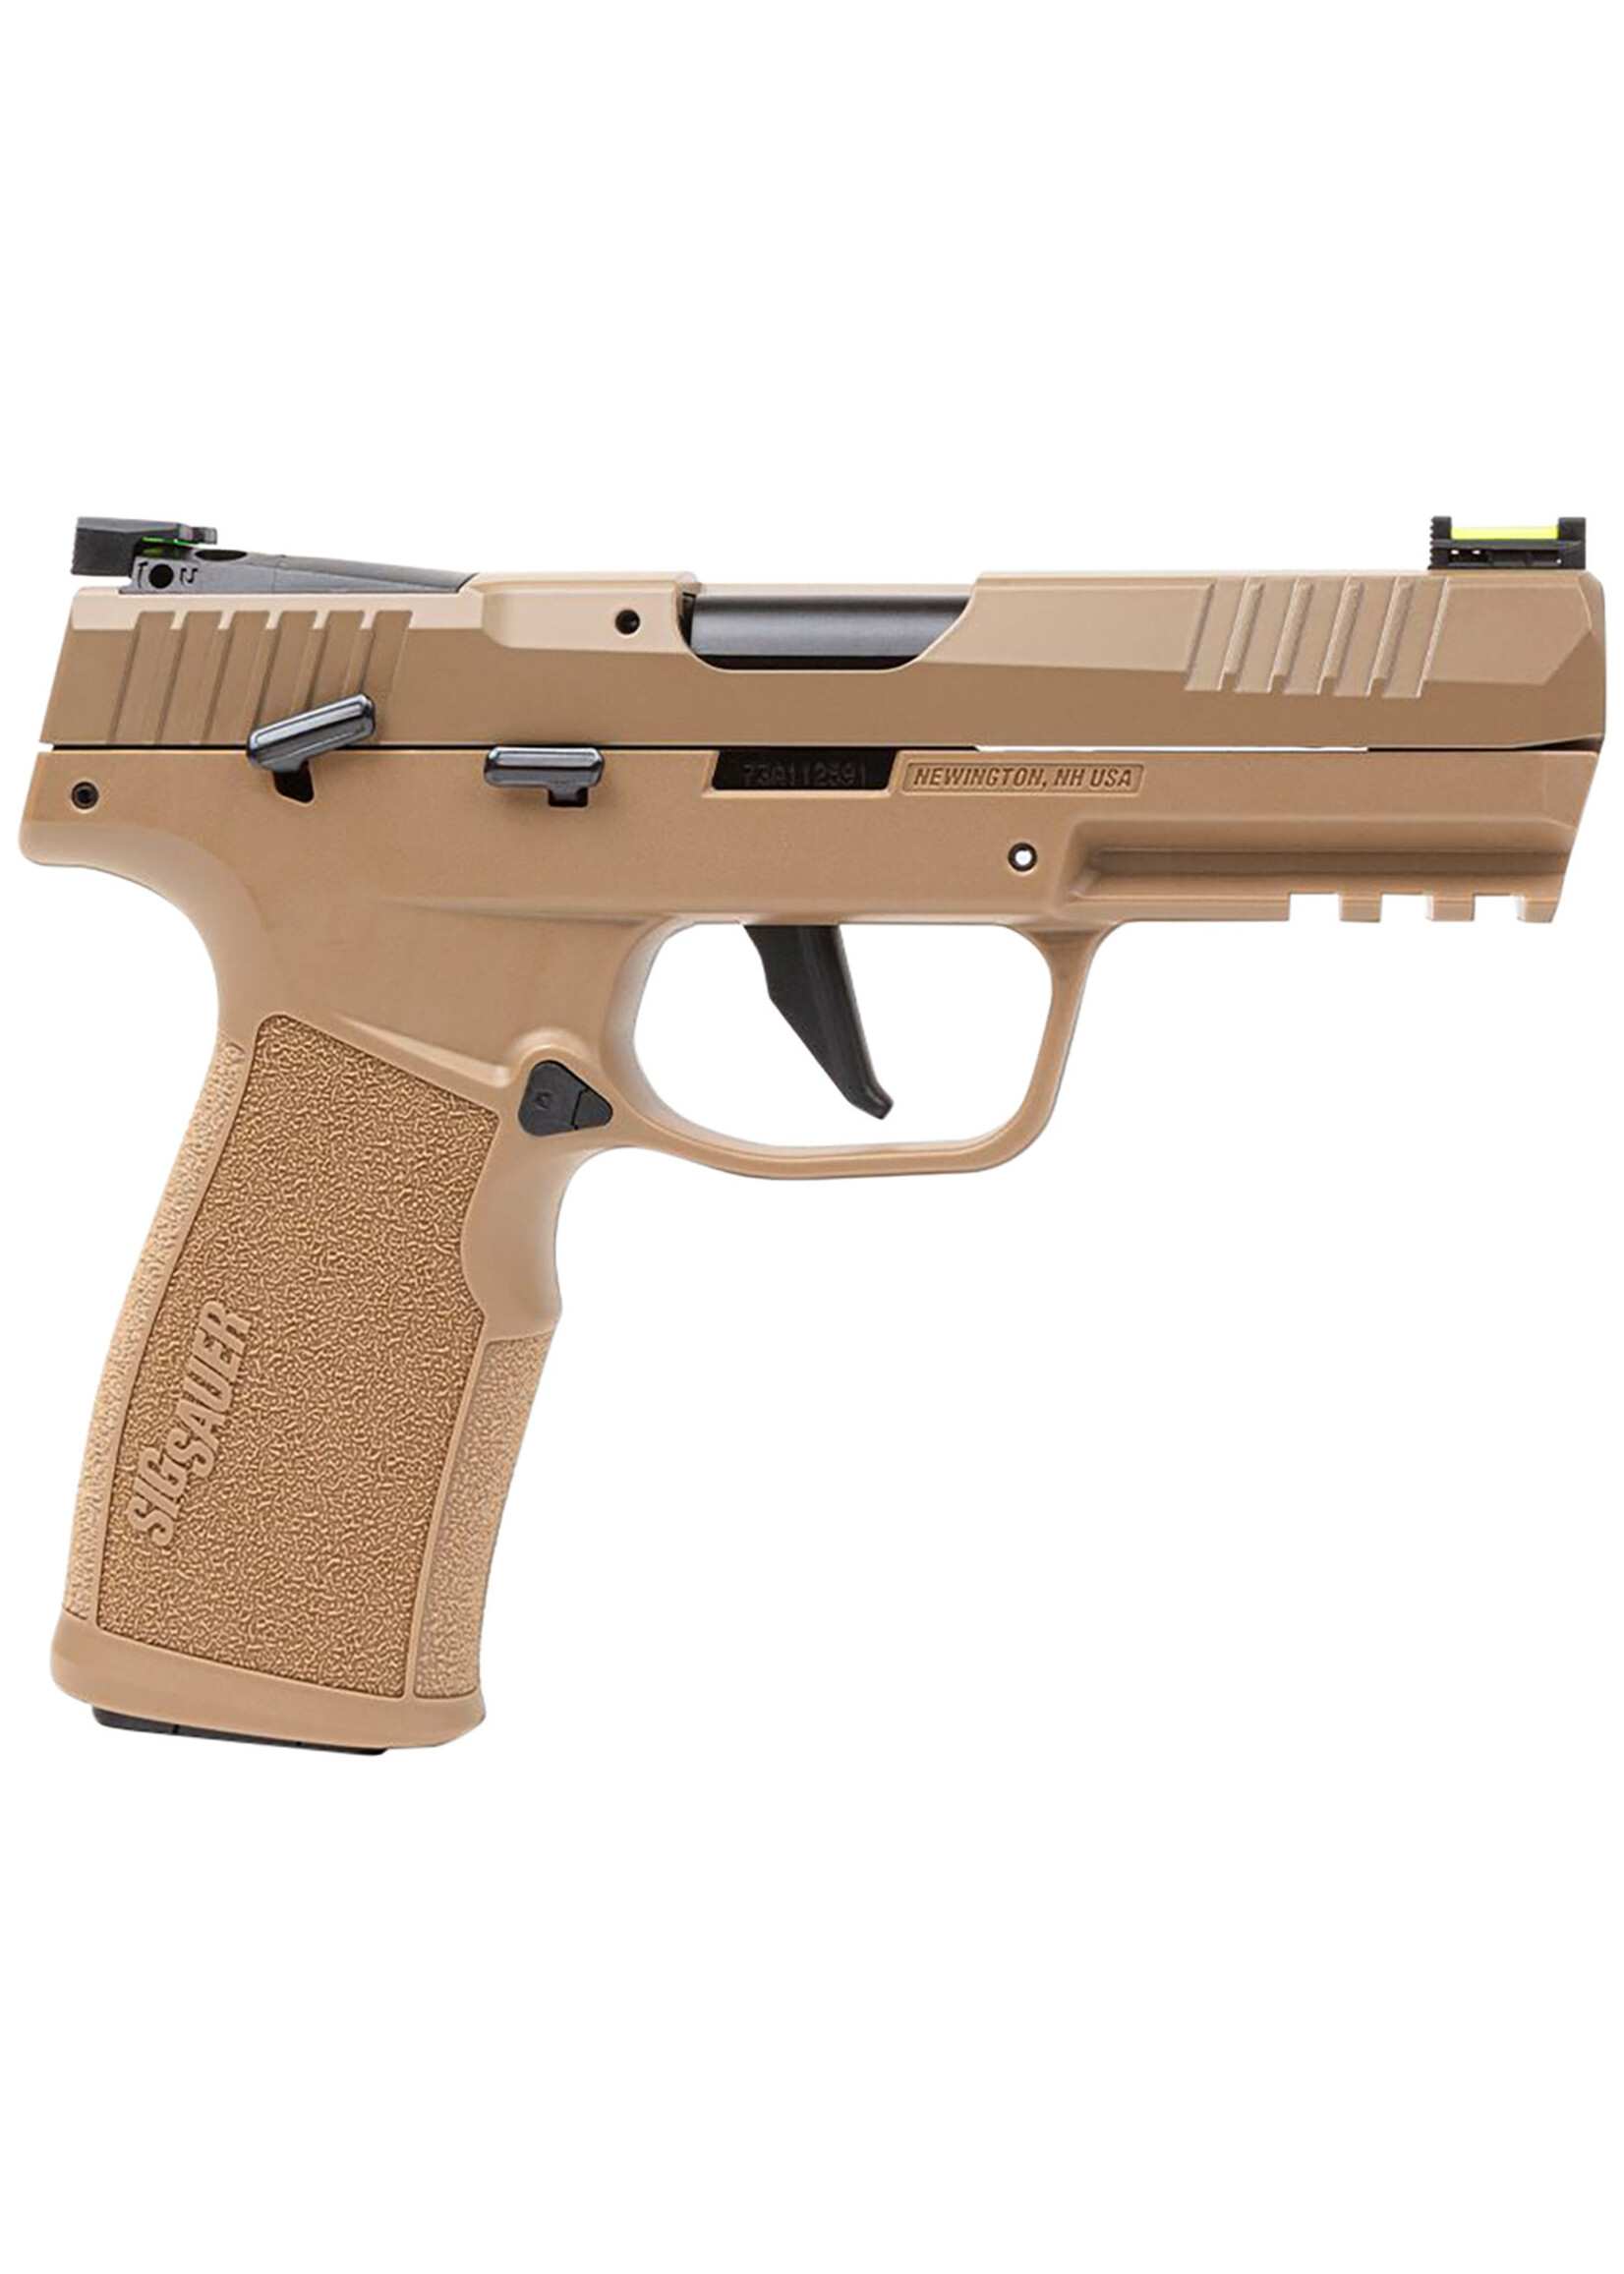 Sig Sauer SPECIAL ORDER Sig Sauer 322CCOYTACPAC P322 Full Size 22 LR 20+1 4" Black Steel w/Threaded Barrel Adapter Barrel/ Coyote Cerakote Optic Ready/Serrated Slide/ Coyote Tan Steel Frame w/Picatinny Rail/ Coyote Polymer Grip Module Grips Ambidextrous